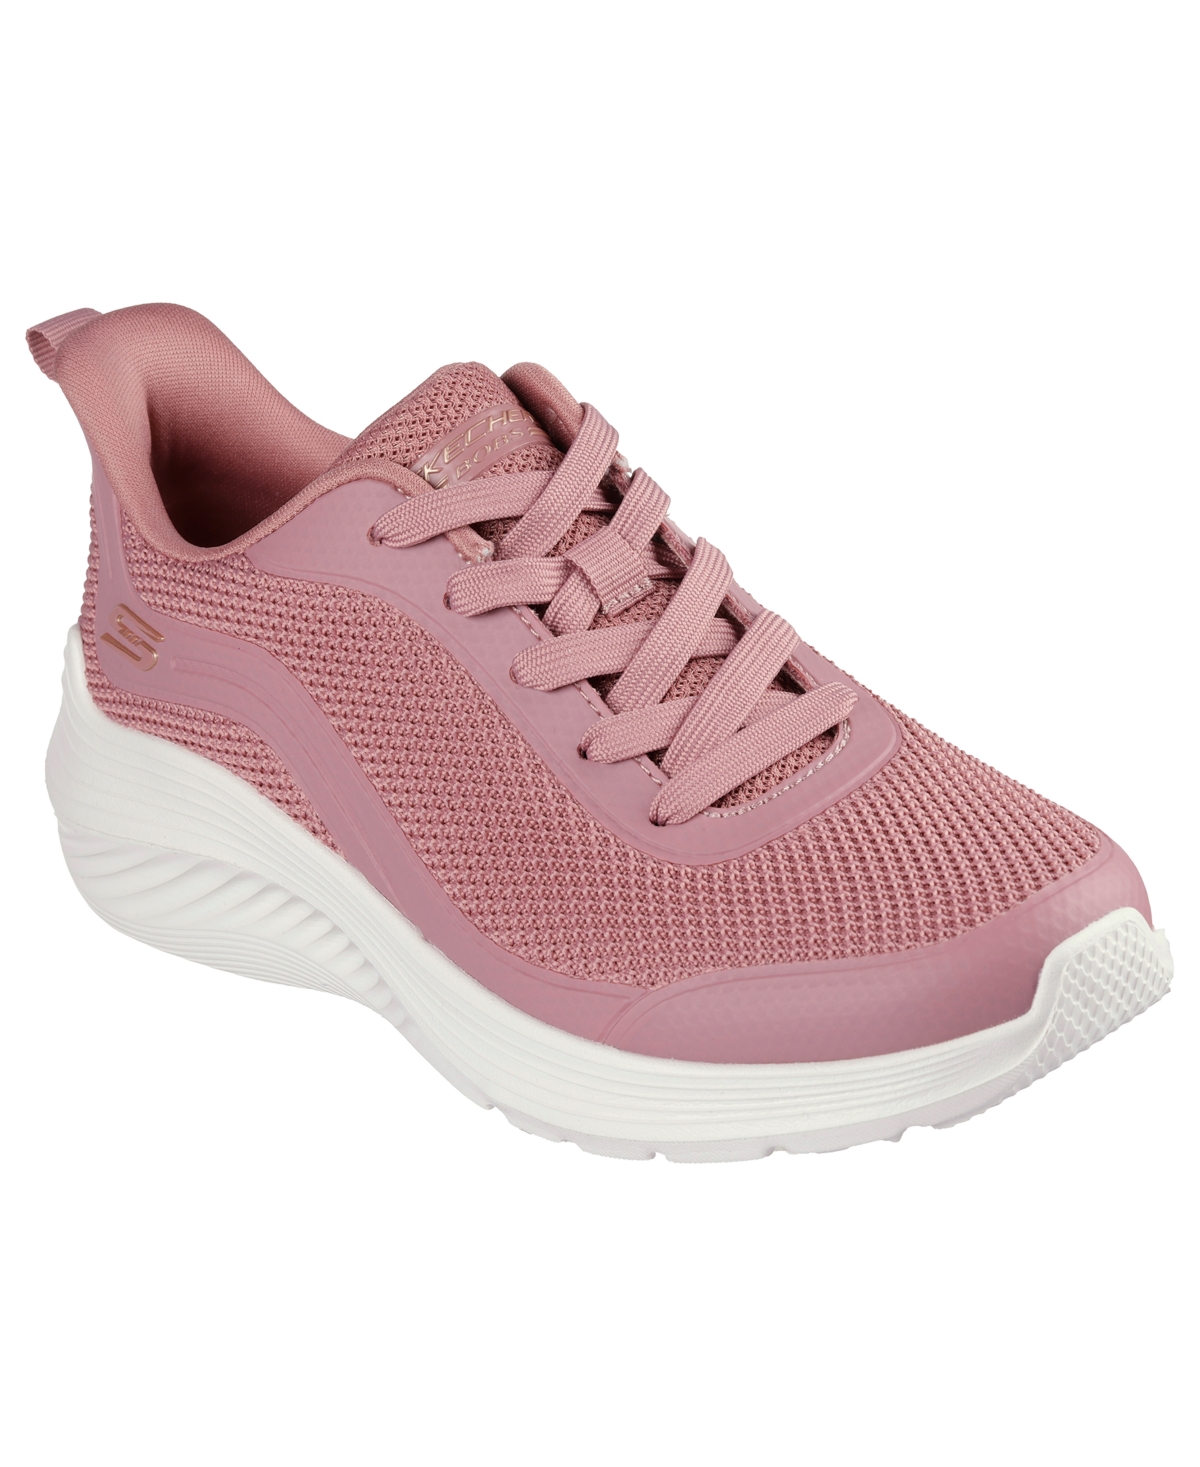 Women's Bobs Sport Squad - Waves Casual Sneakers from Finish Line - Rose